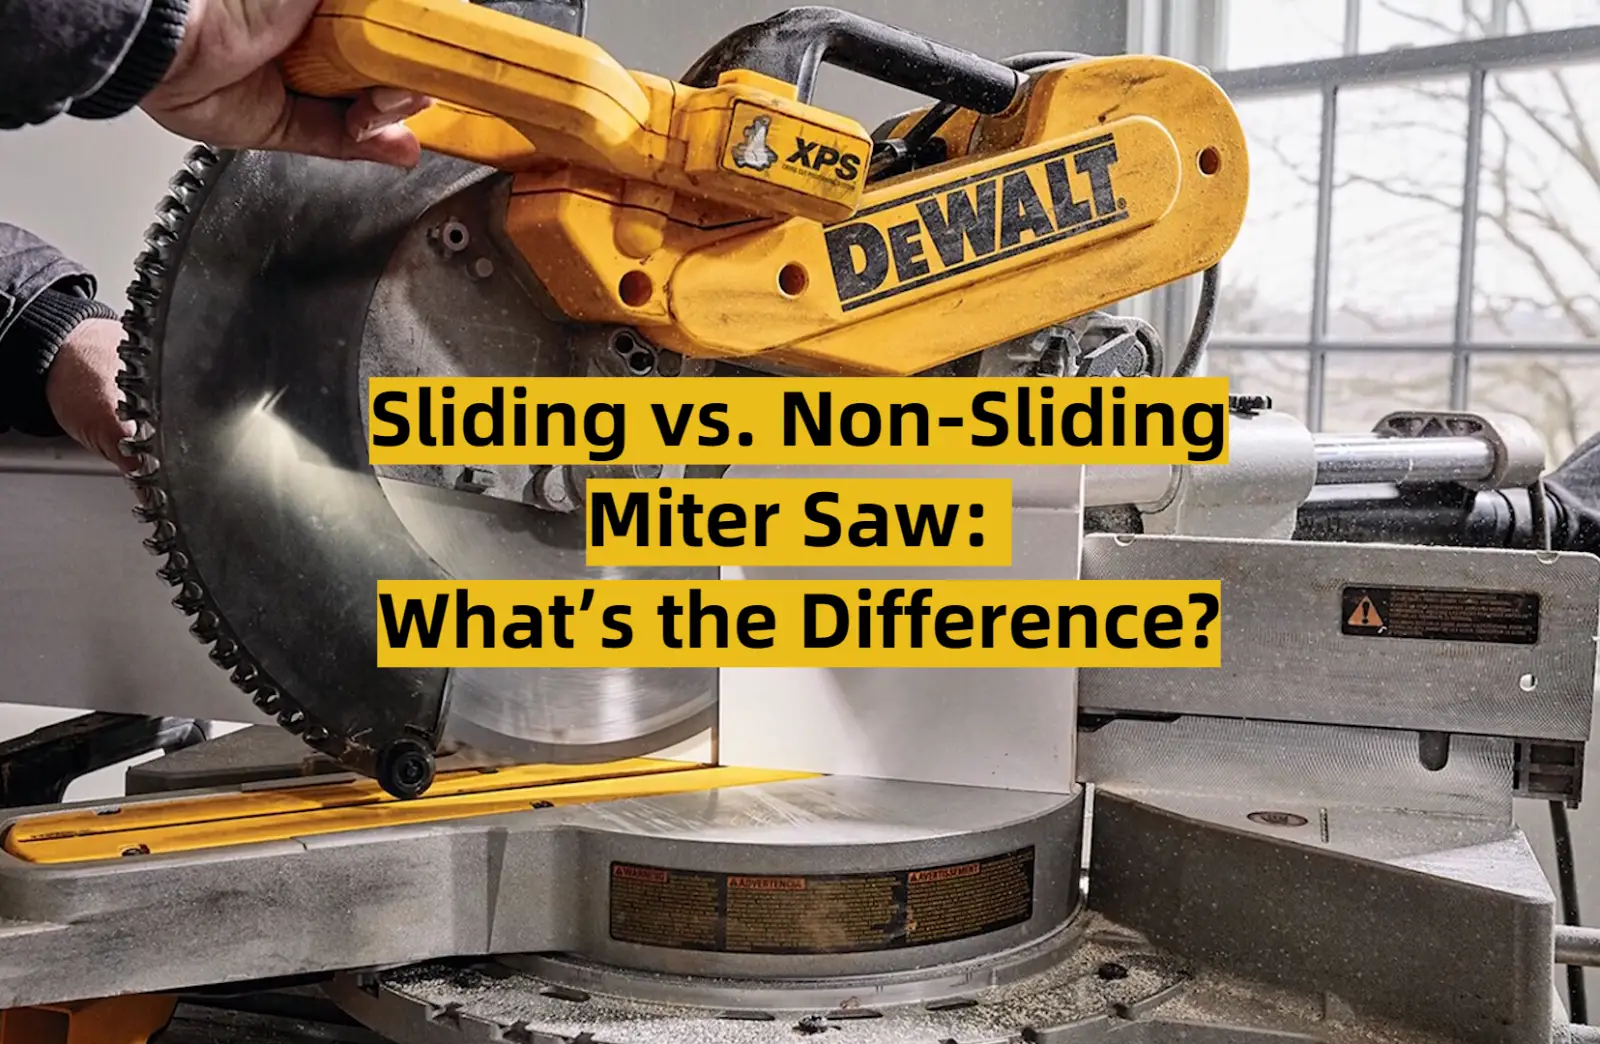 Sliding vs. Non-Sliding Miter Saw: What’s the Difference?